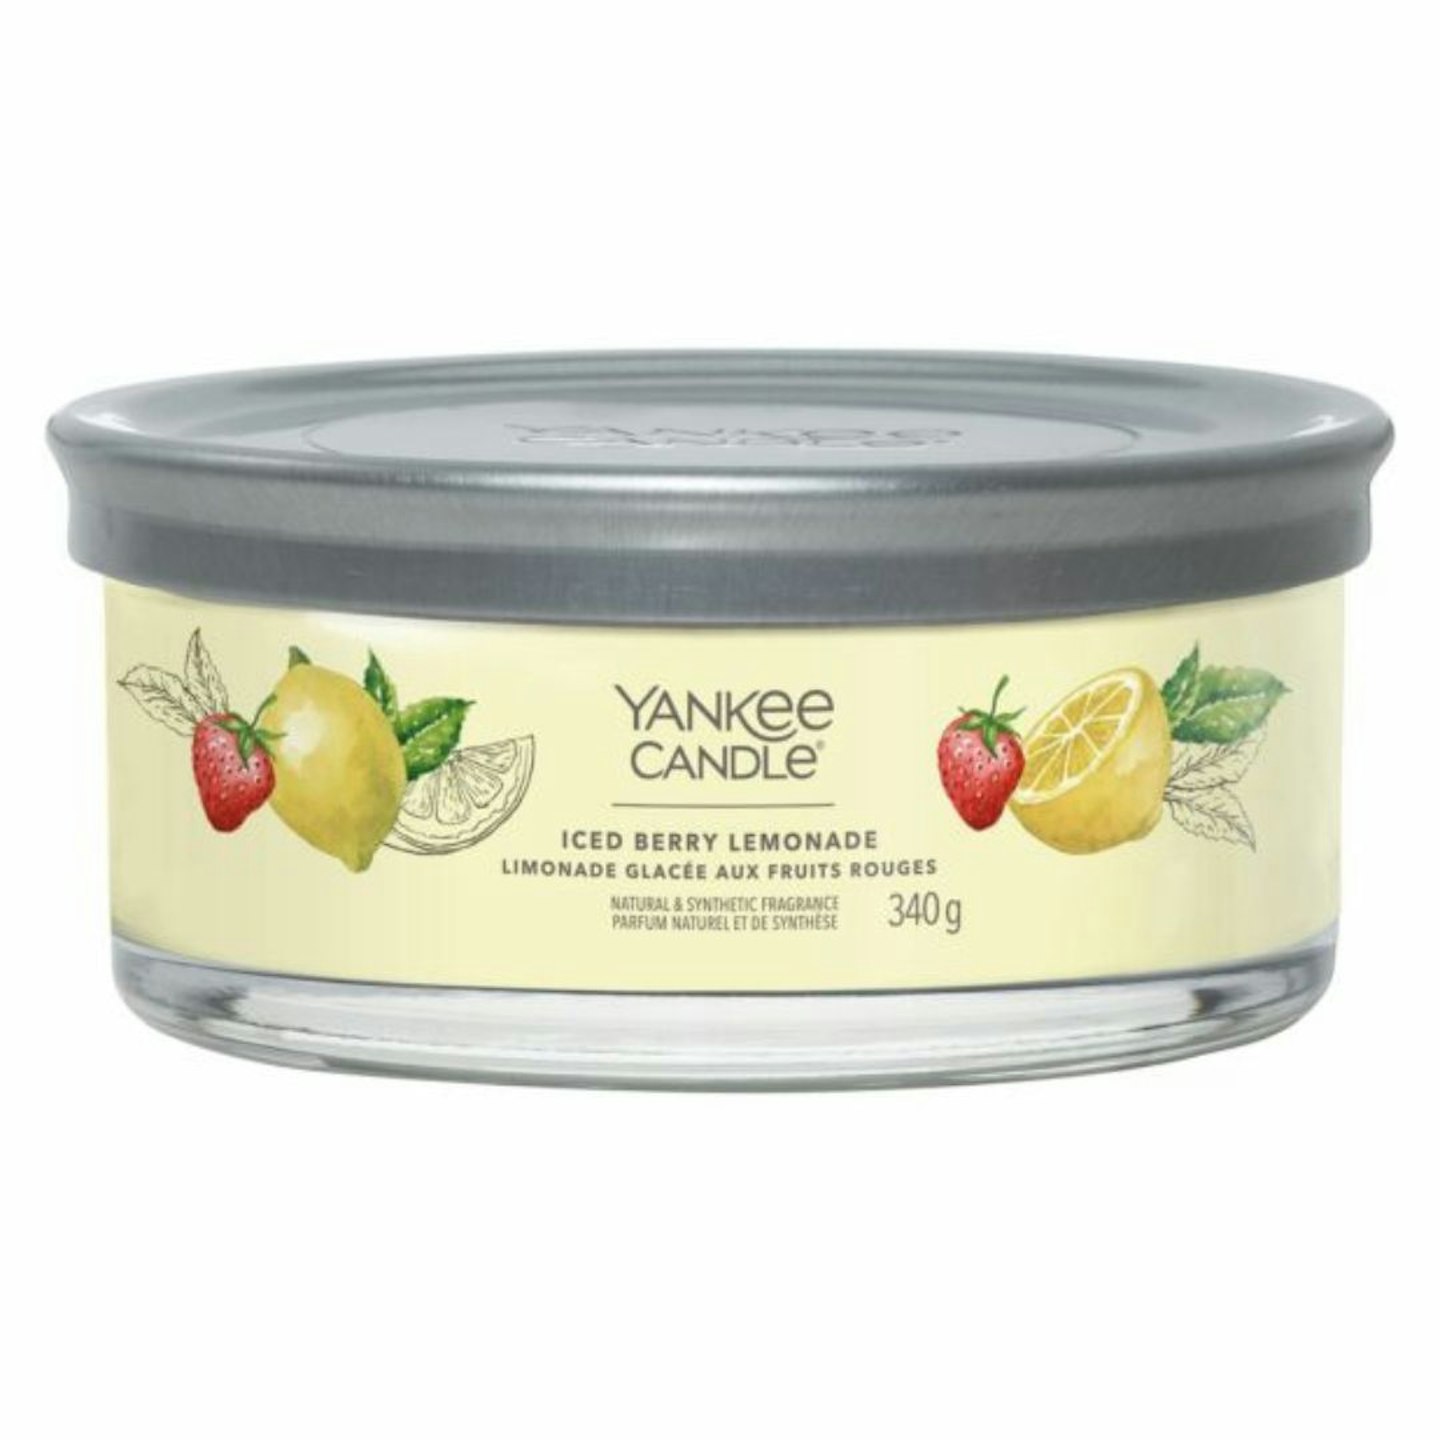 Best Yankee Candle deals: Yankee Candle Iced Berry Lemonade Signature Multi-Wick Tumbler Candle